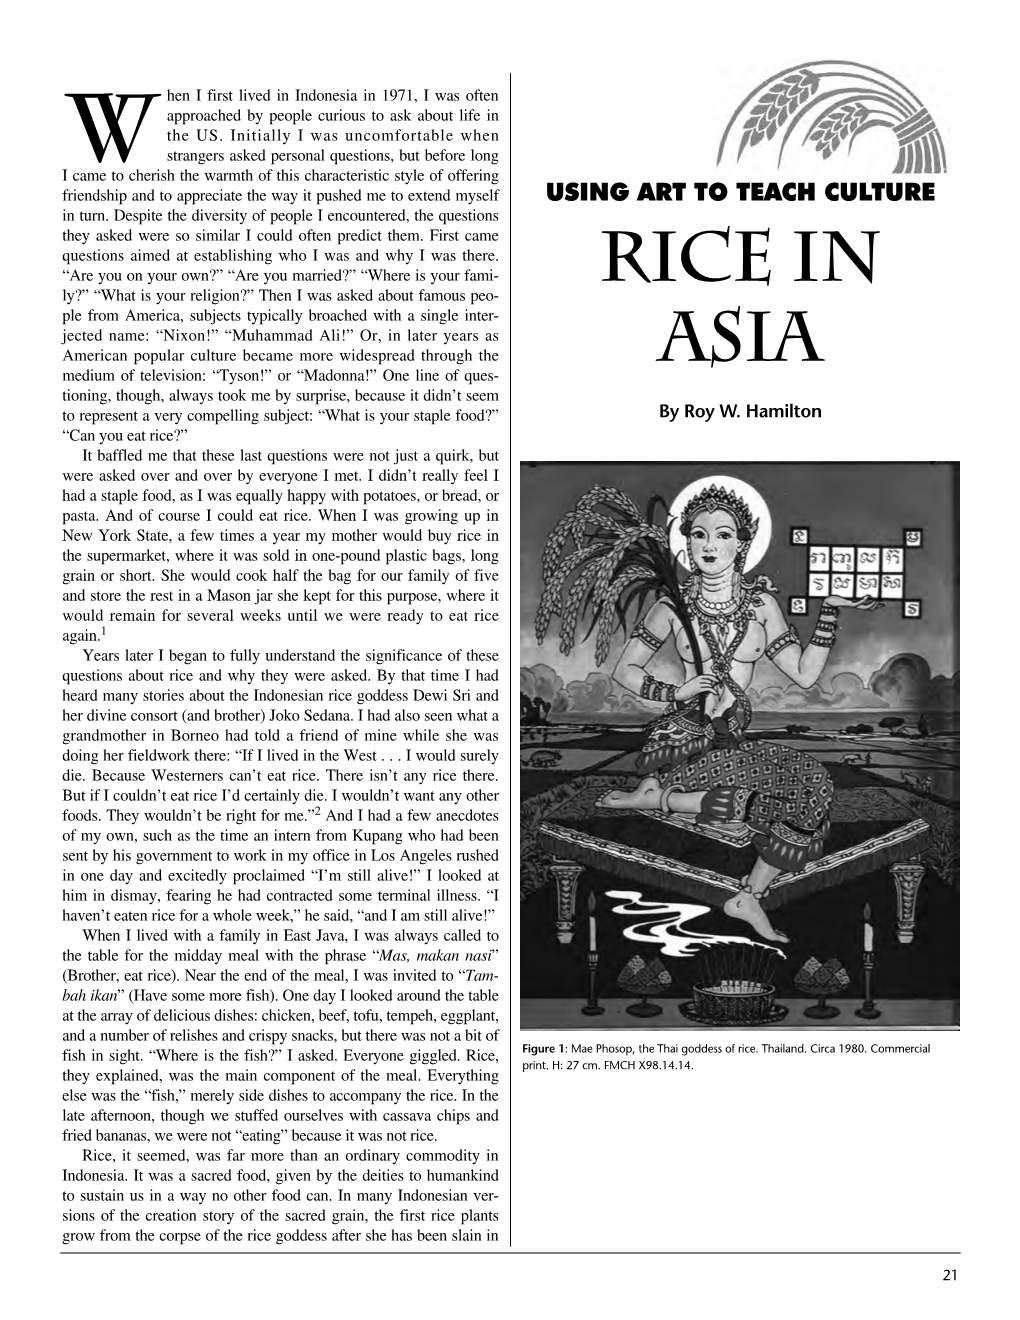 Using Art to Teach Culture: Rice in Asia